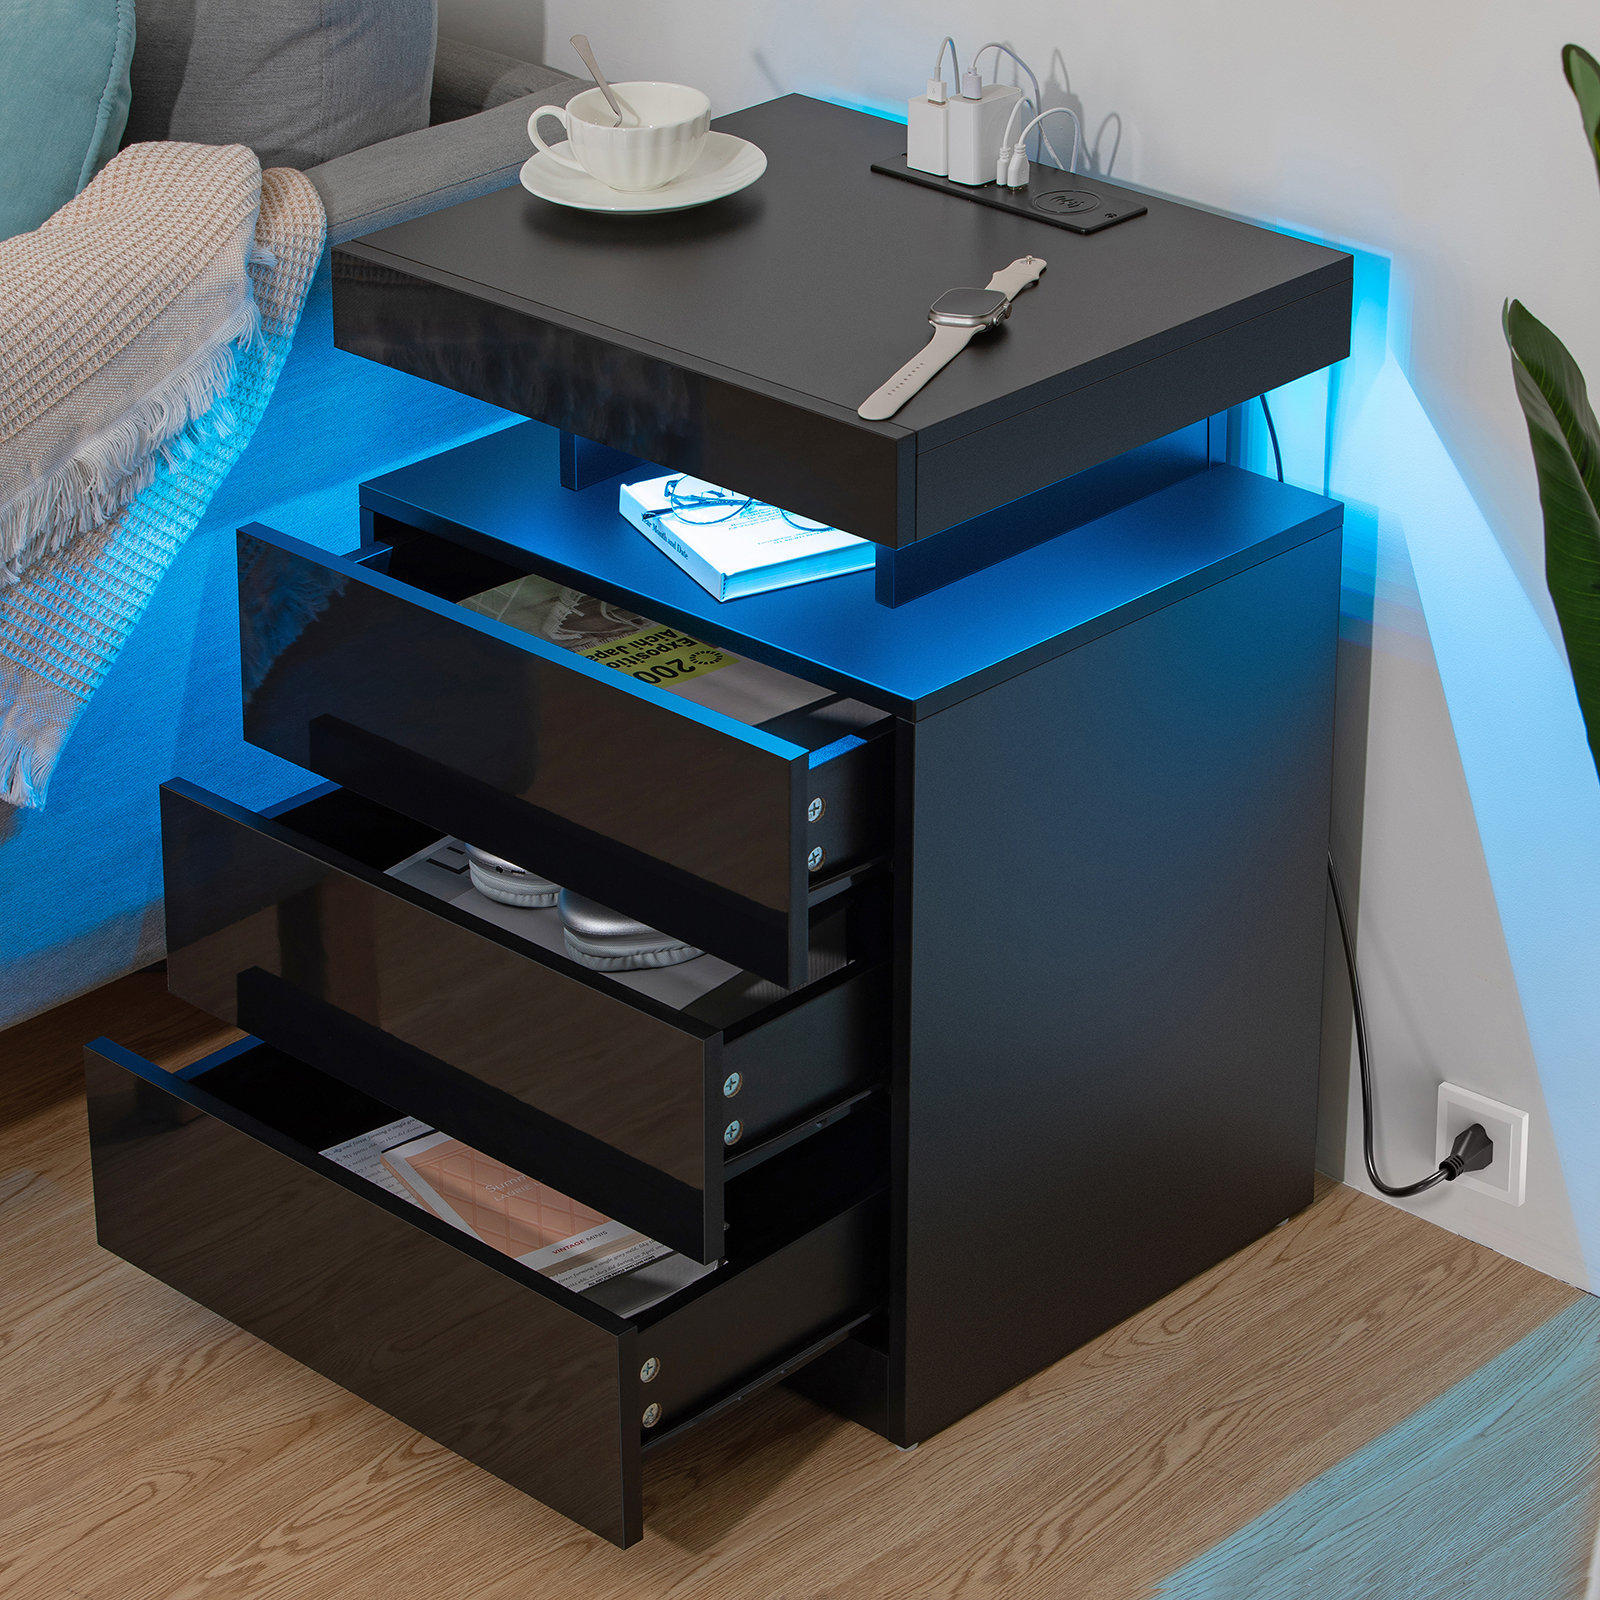 IKEA Wants to Charge Cool Gadgets with Even Cooler Furniture